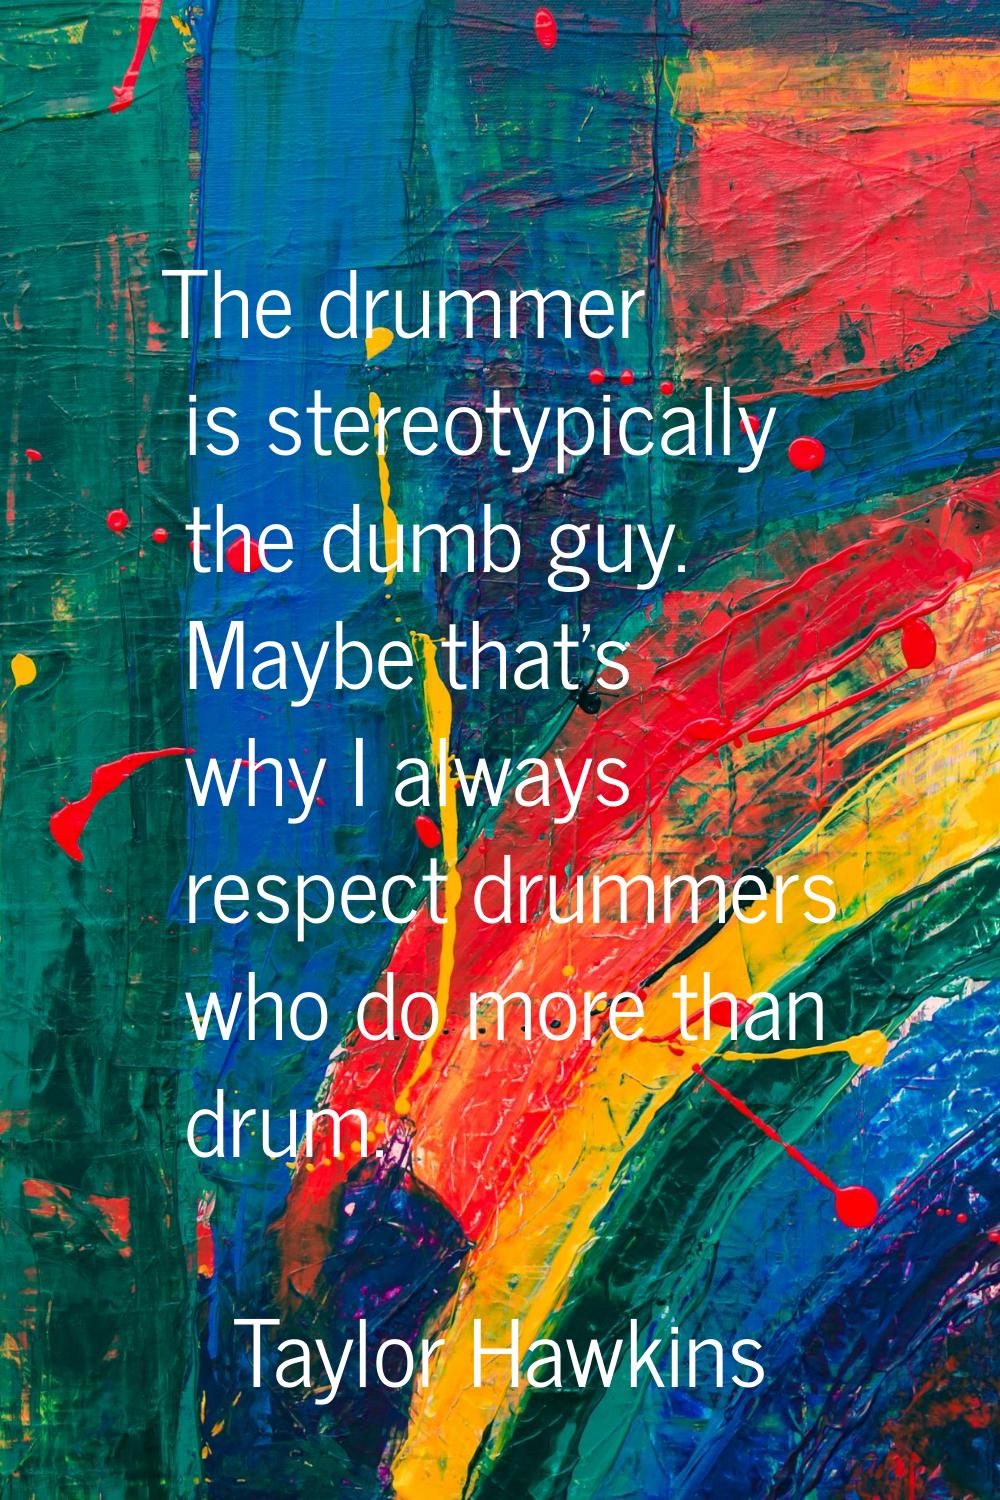 The drummer is stereotypically the dumb guy. Maybe that's why I always respect drummers who do more